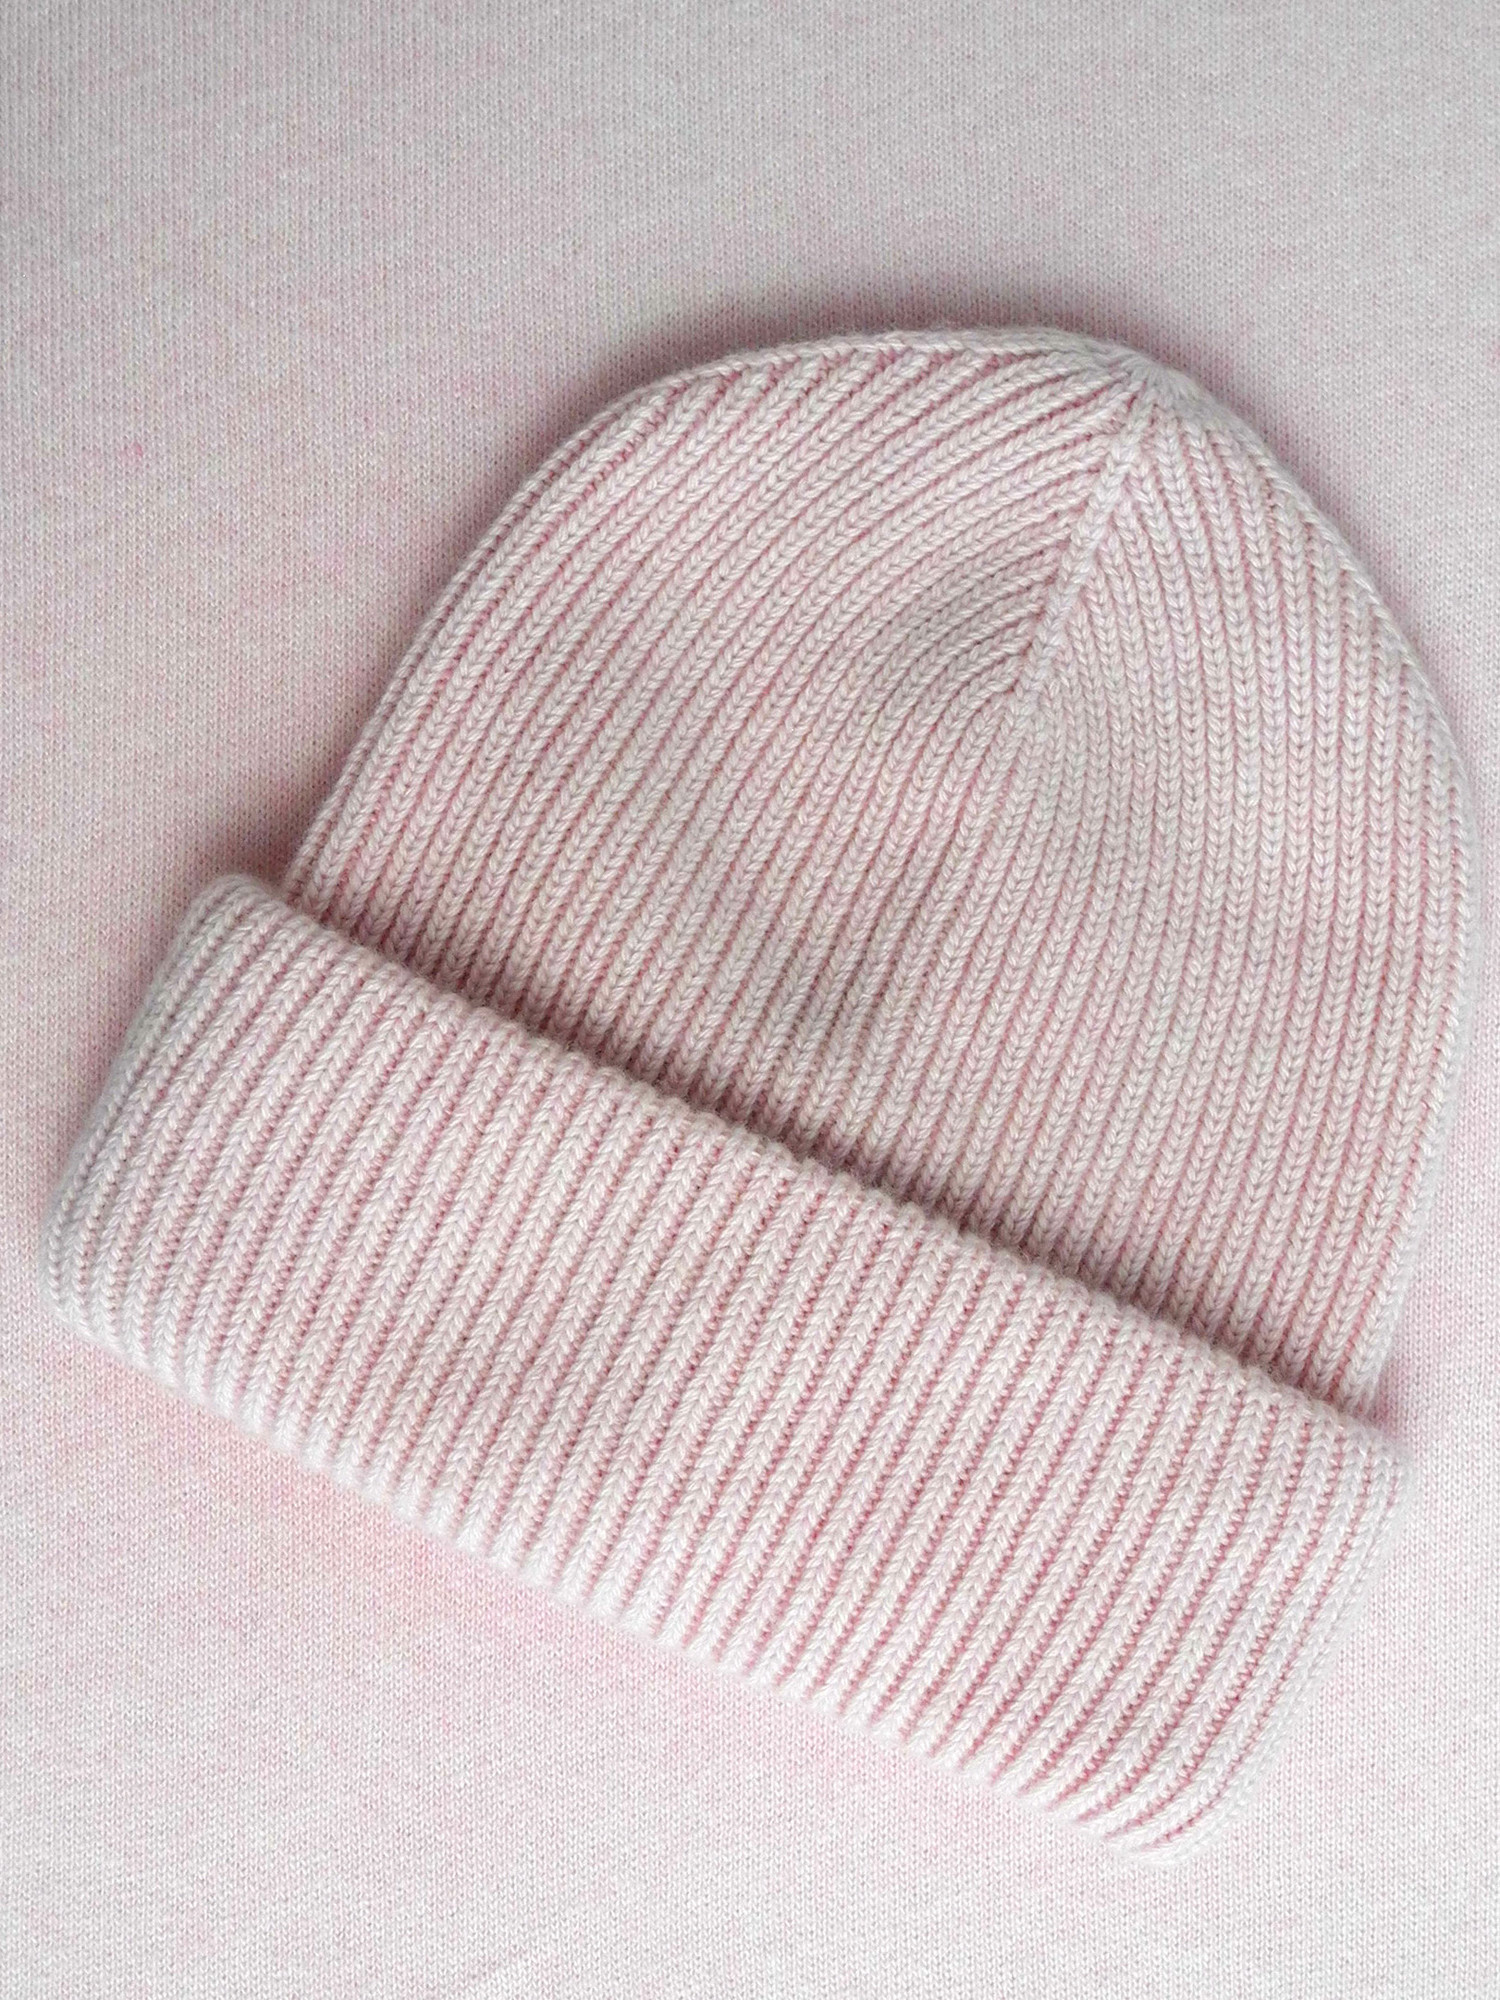 C.O.S.Y by SjaalMania Cosy Beanie Light Pink